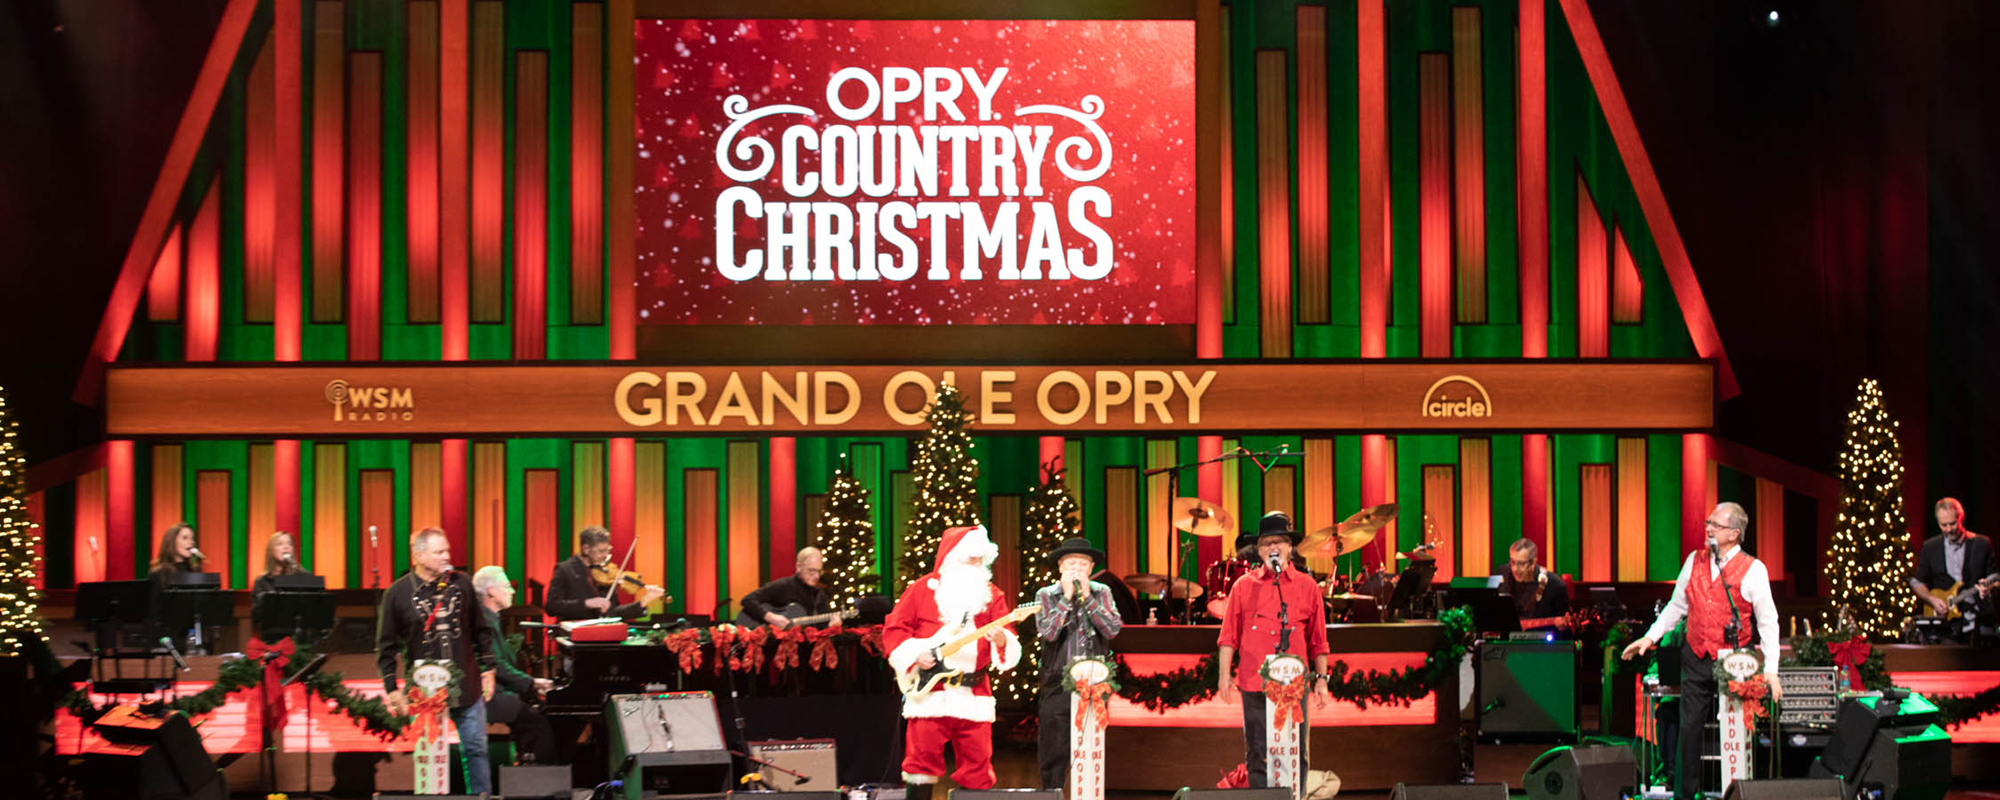 Scotty McCreery, Lady A Among ‘Opry Country Christmas’ Performers